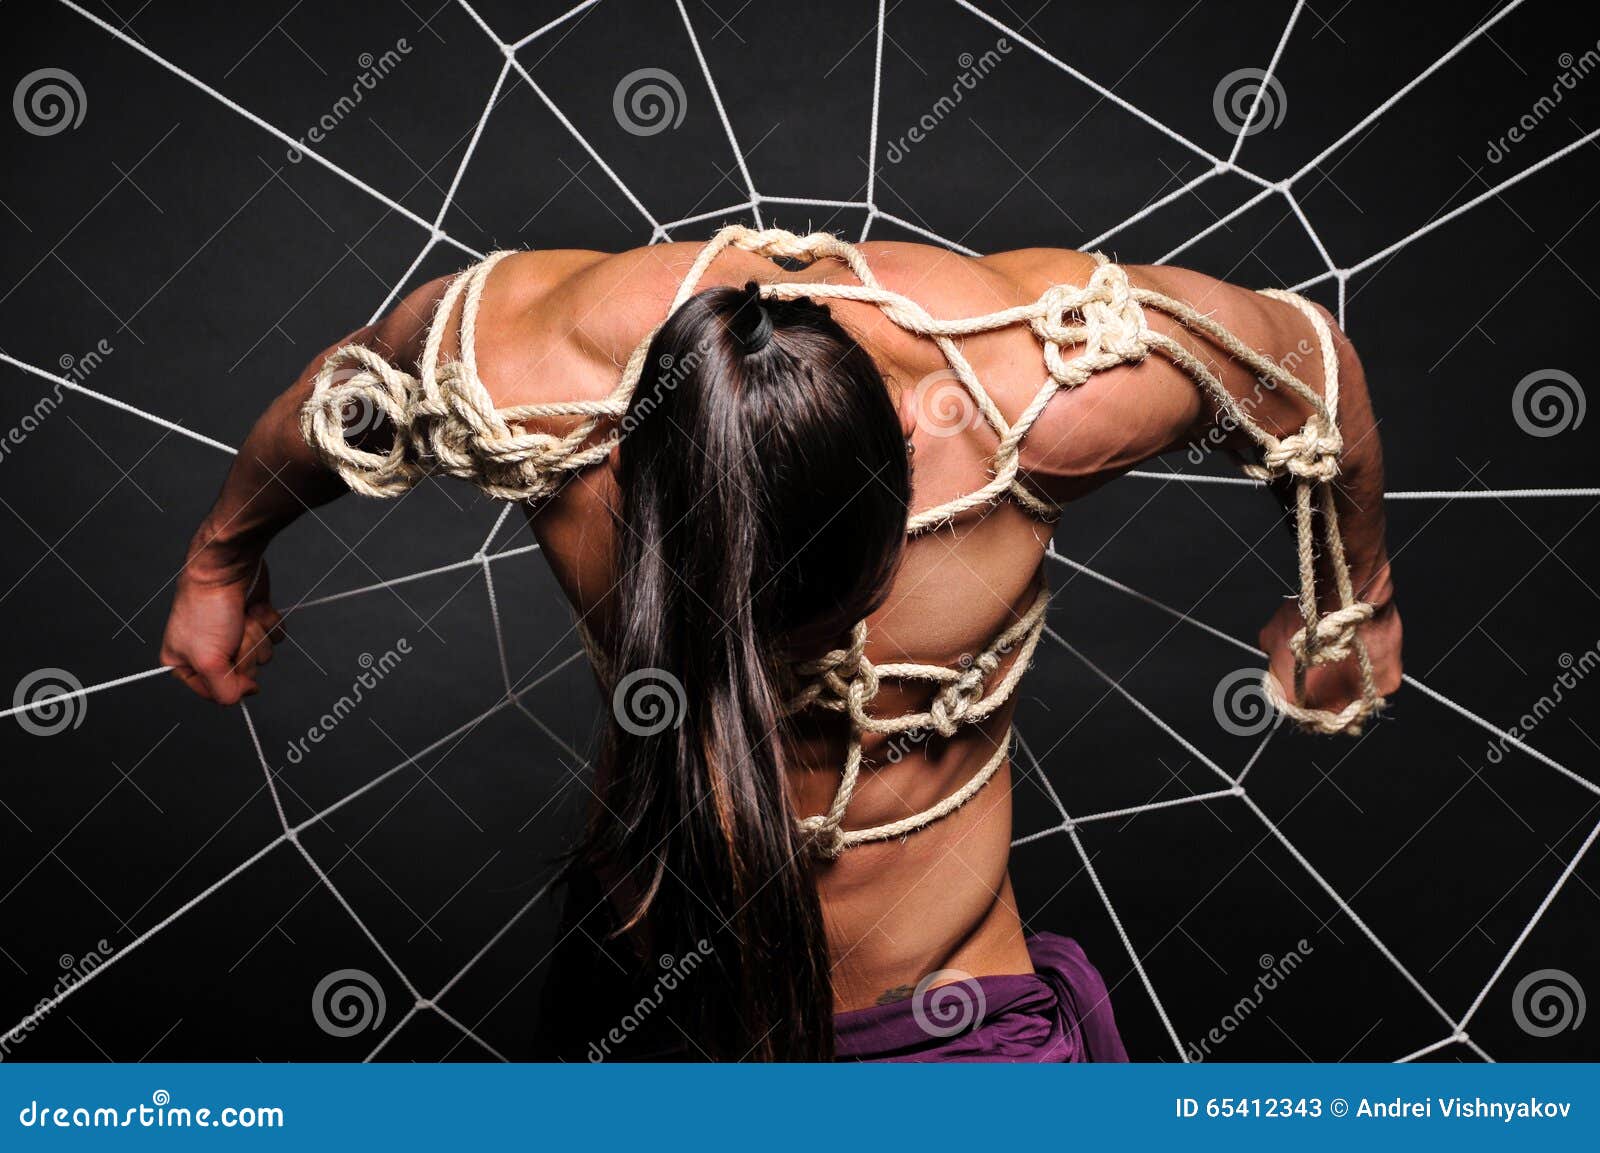 christian carichner recommends female on male bondage pic